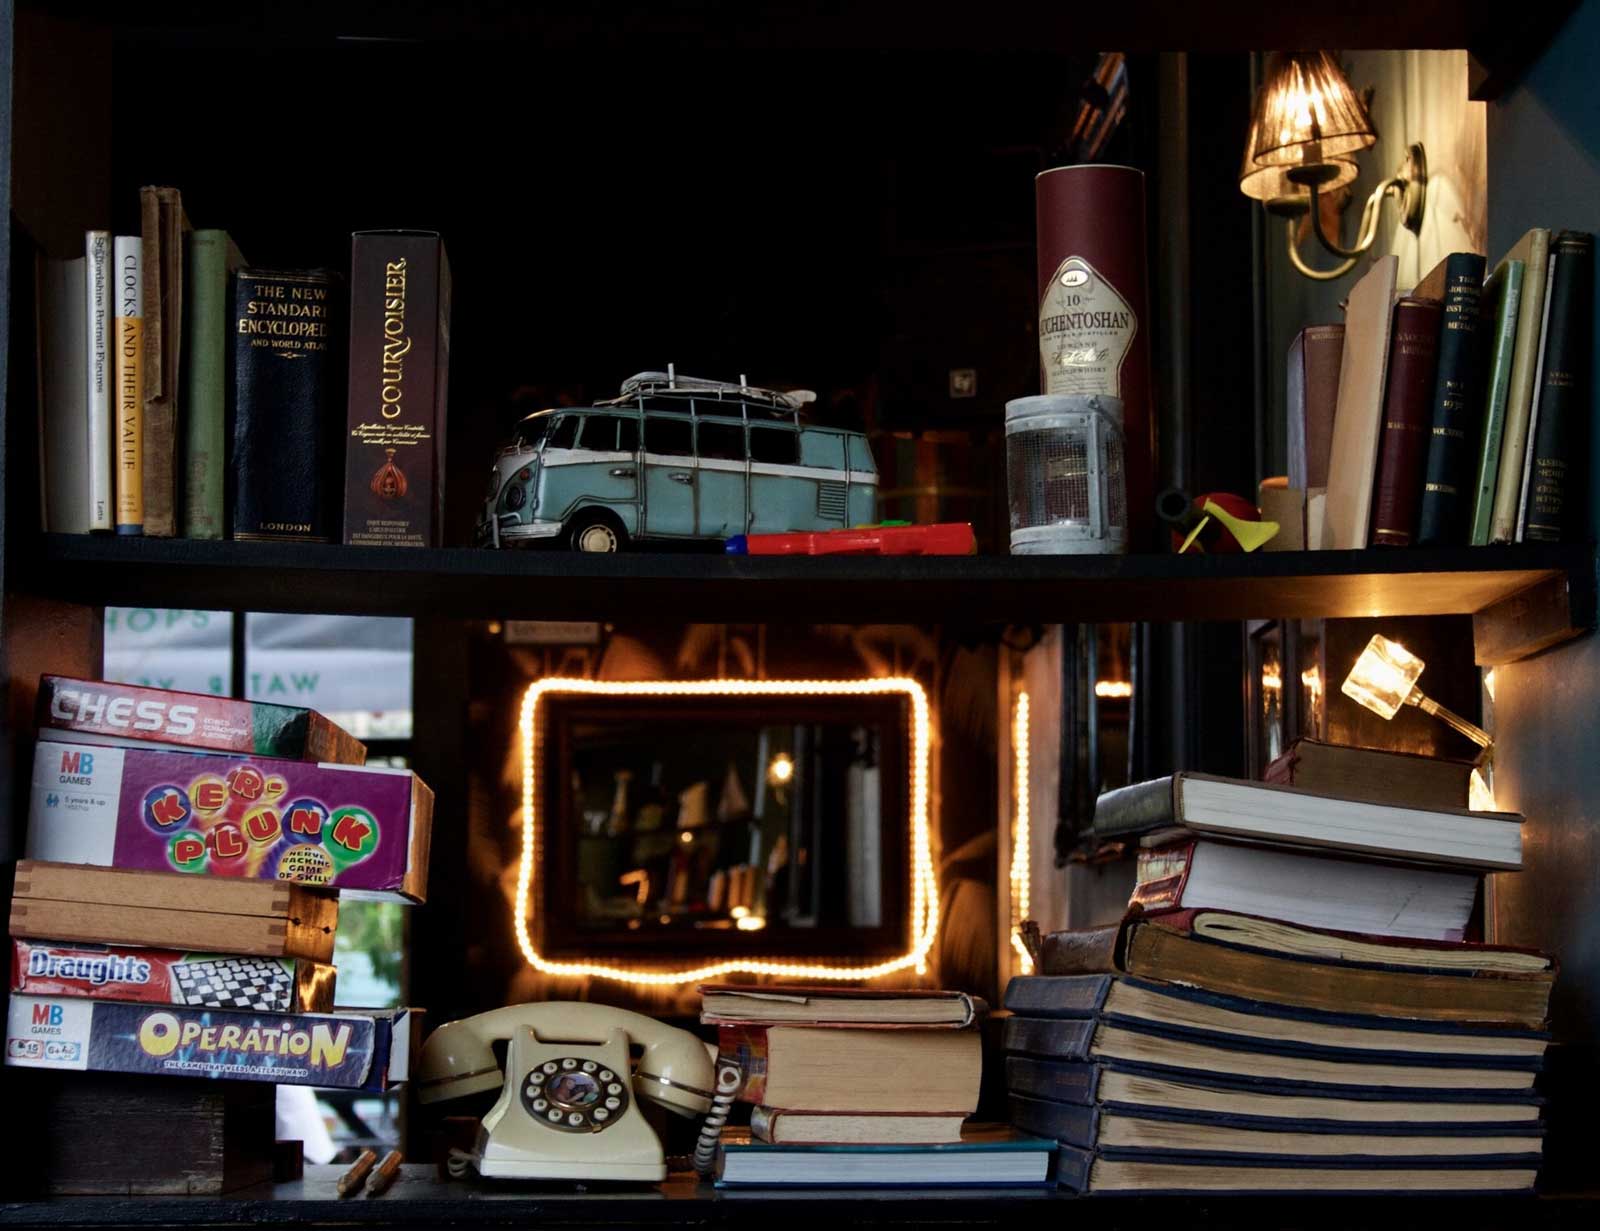 Are you displaying expensive art work on your bookshelves?